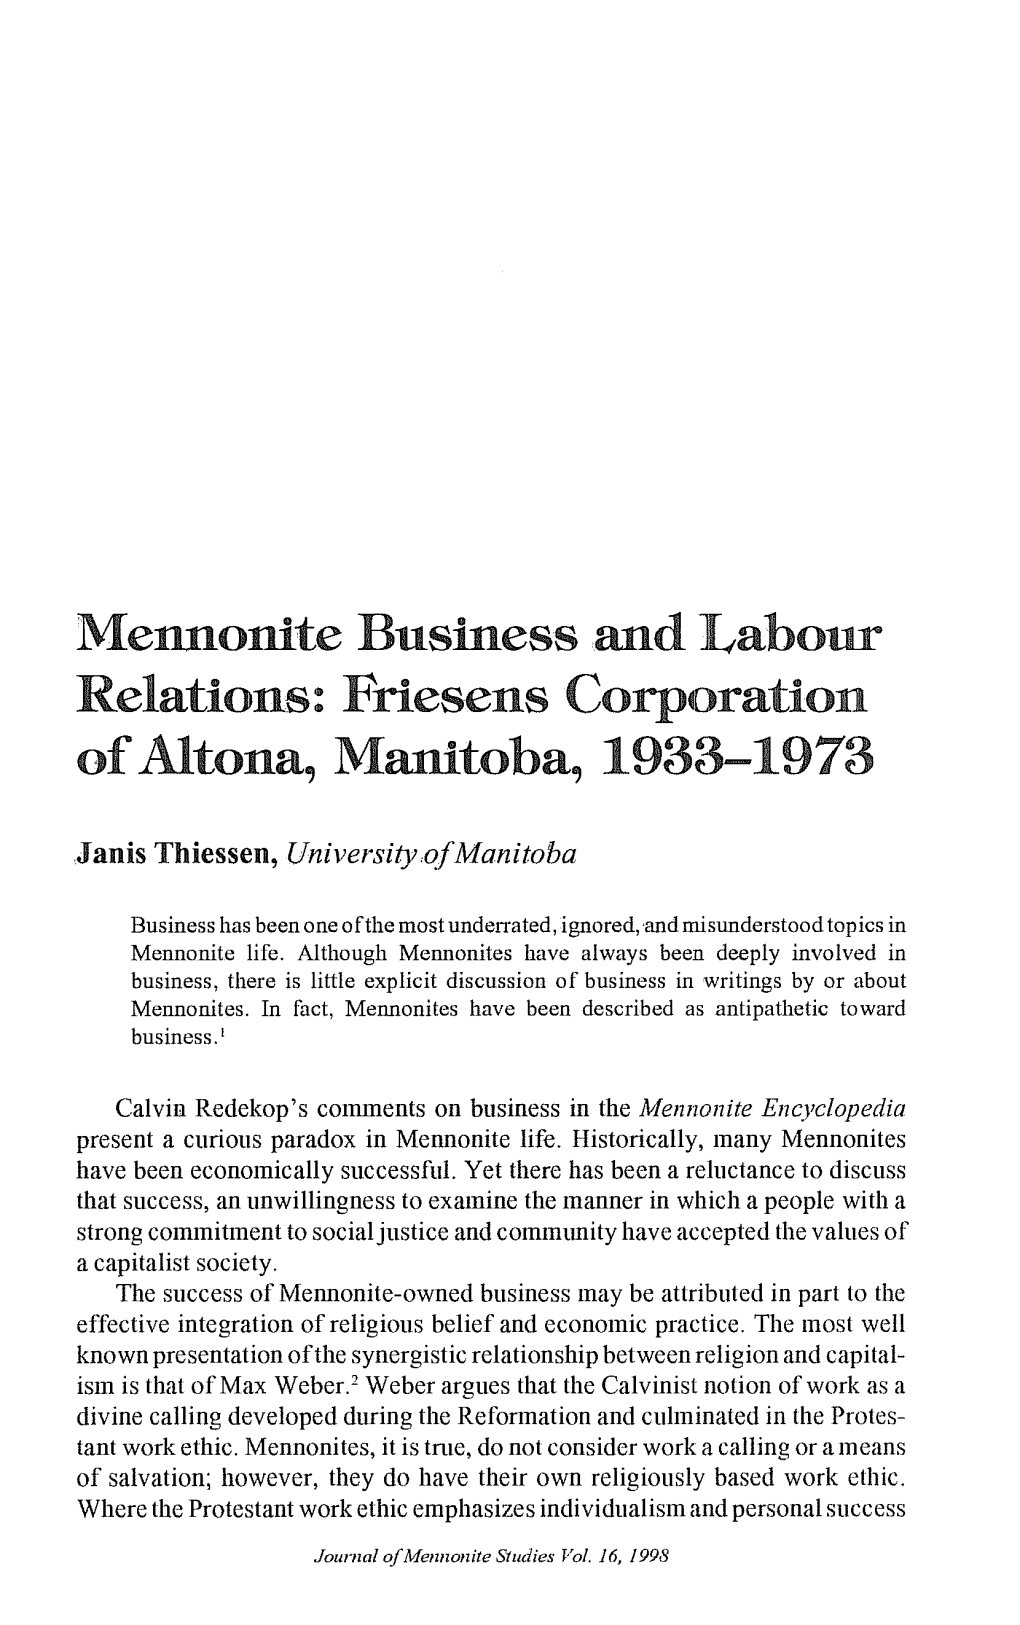 Mennonite Business and Labour Relations: Friesens Corporation Of